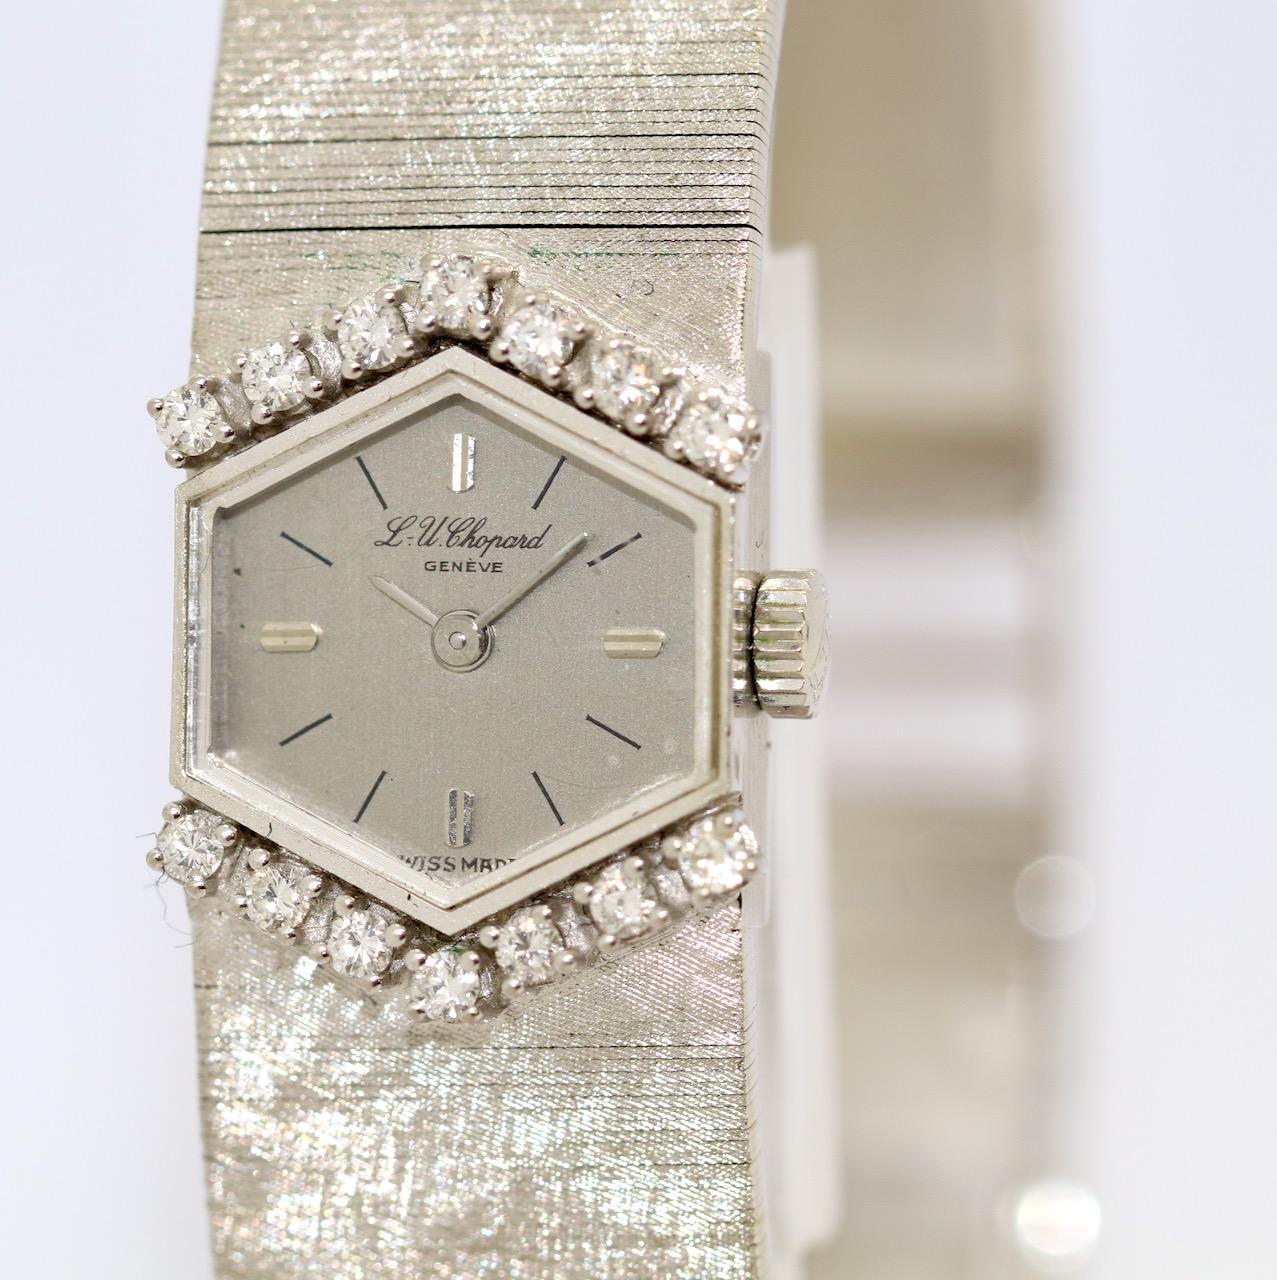 18 Karat White Gold Ladies Wrist Watch by Chopard, with Diamonds, Hexagonal Shape

Includes certificate of authenticity.